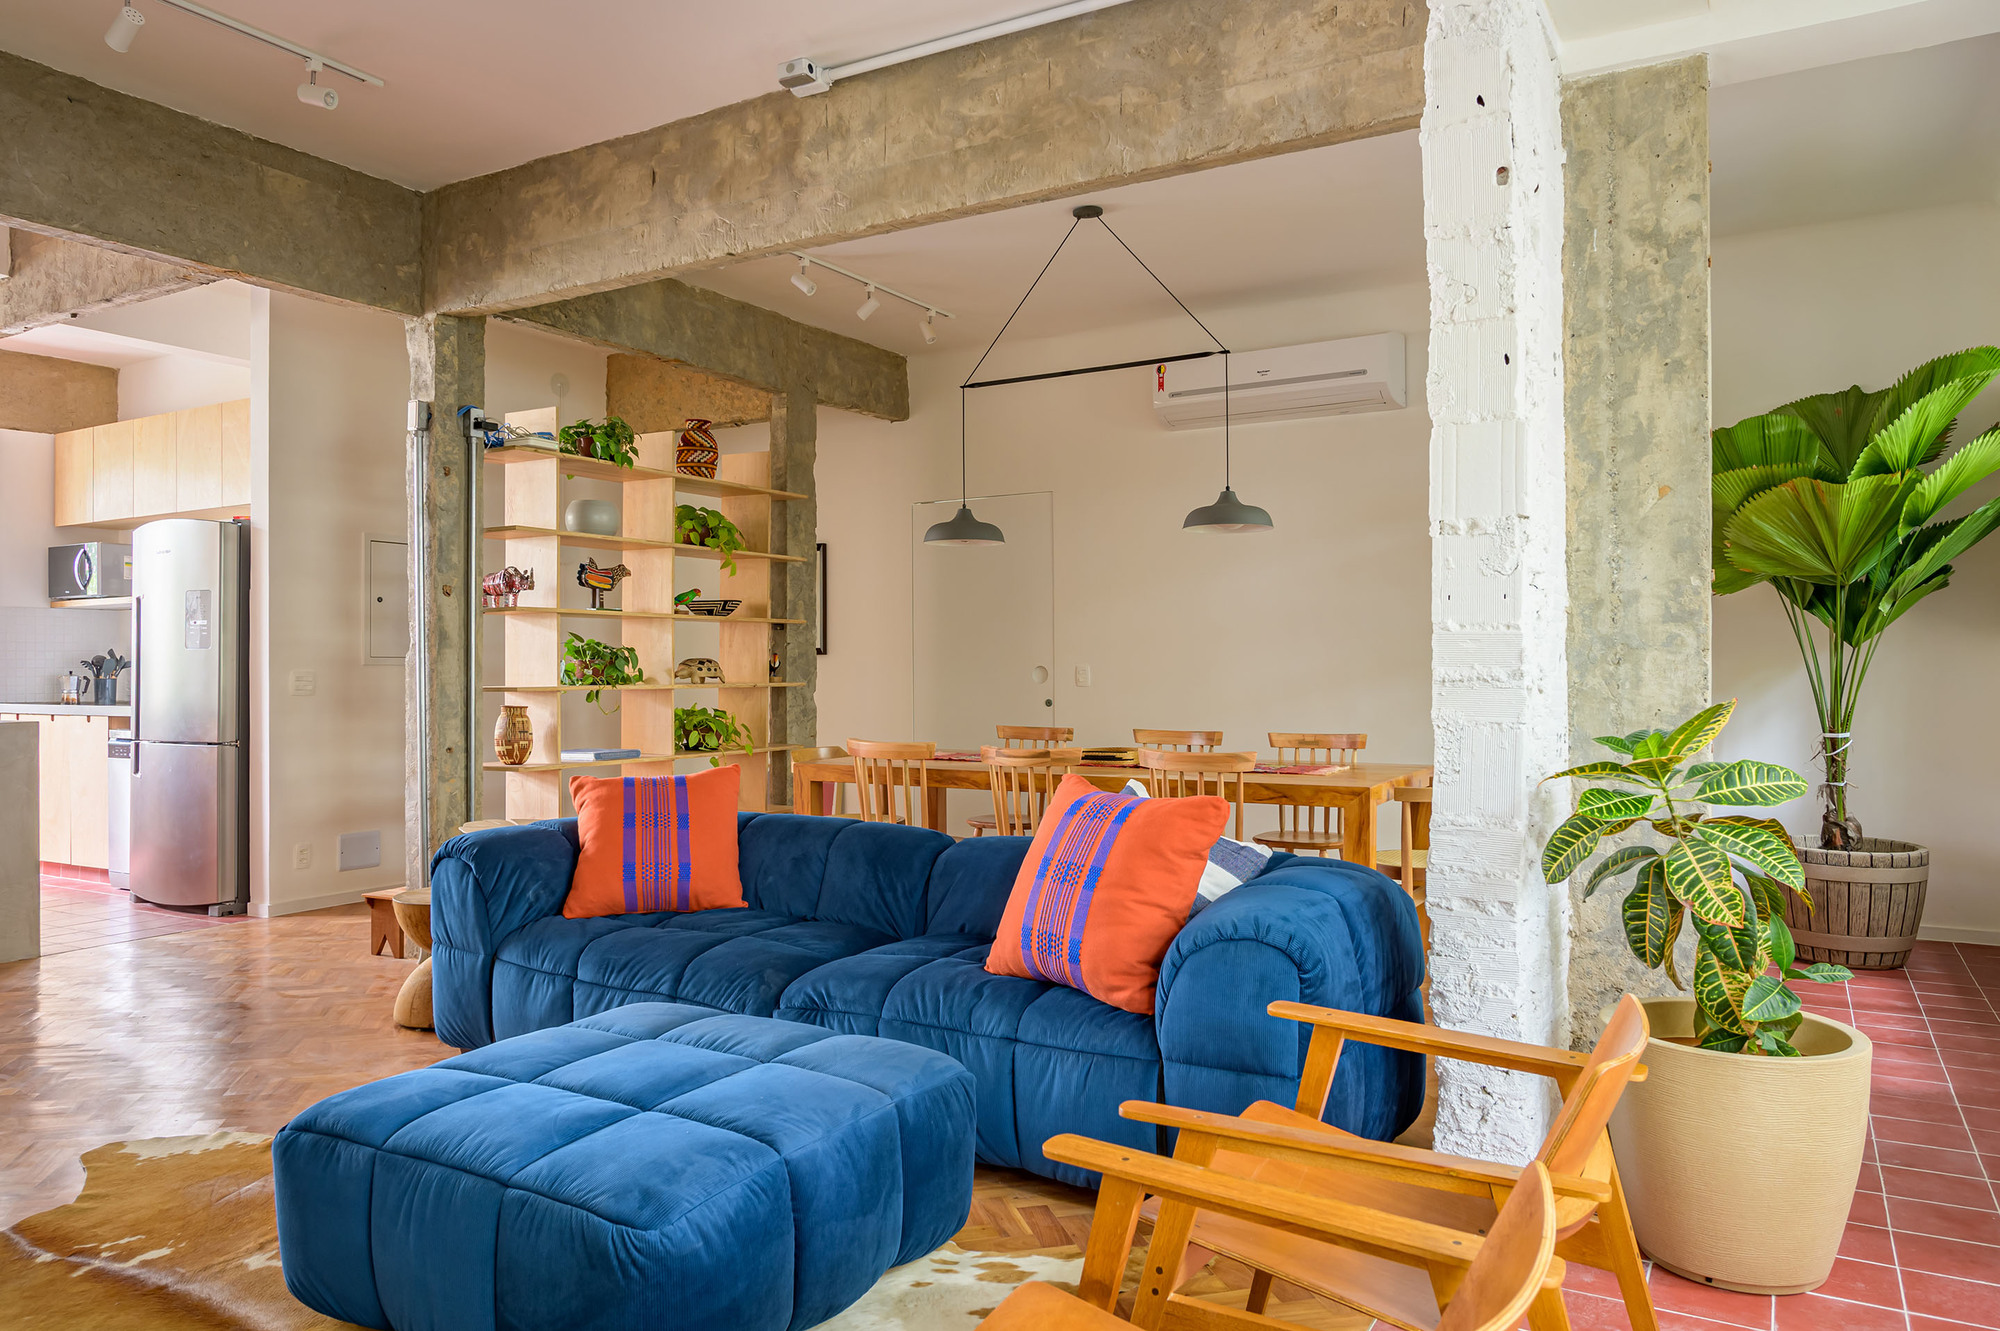 Renovating the Interior of an Old Apartment is Not Easy, Castro Cyon Arquitetas Uses the Concept of "As Is"